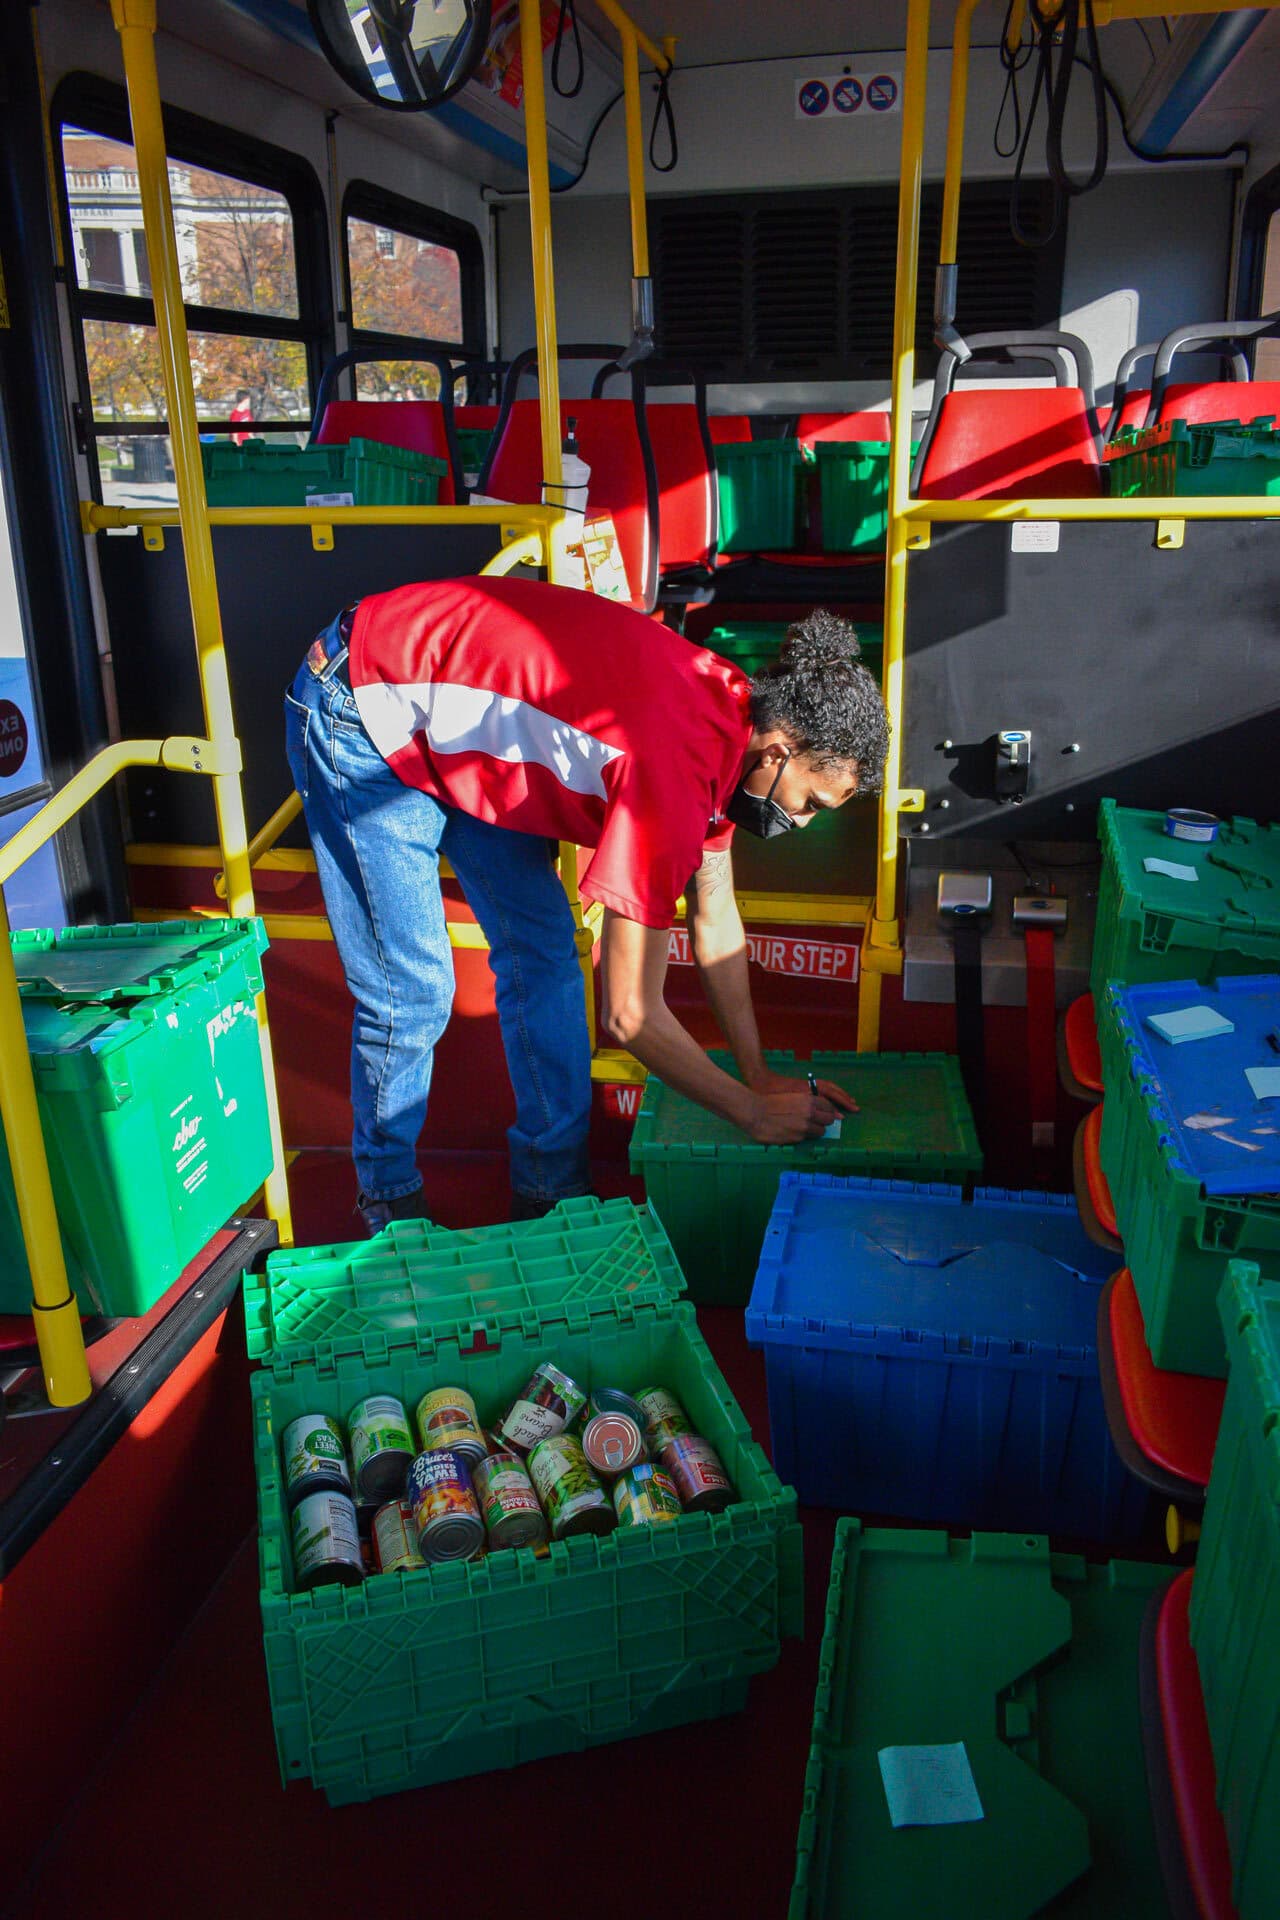 Students sort donations on bus during food drive